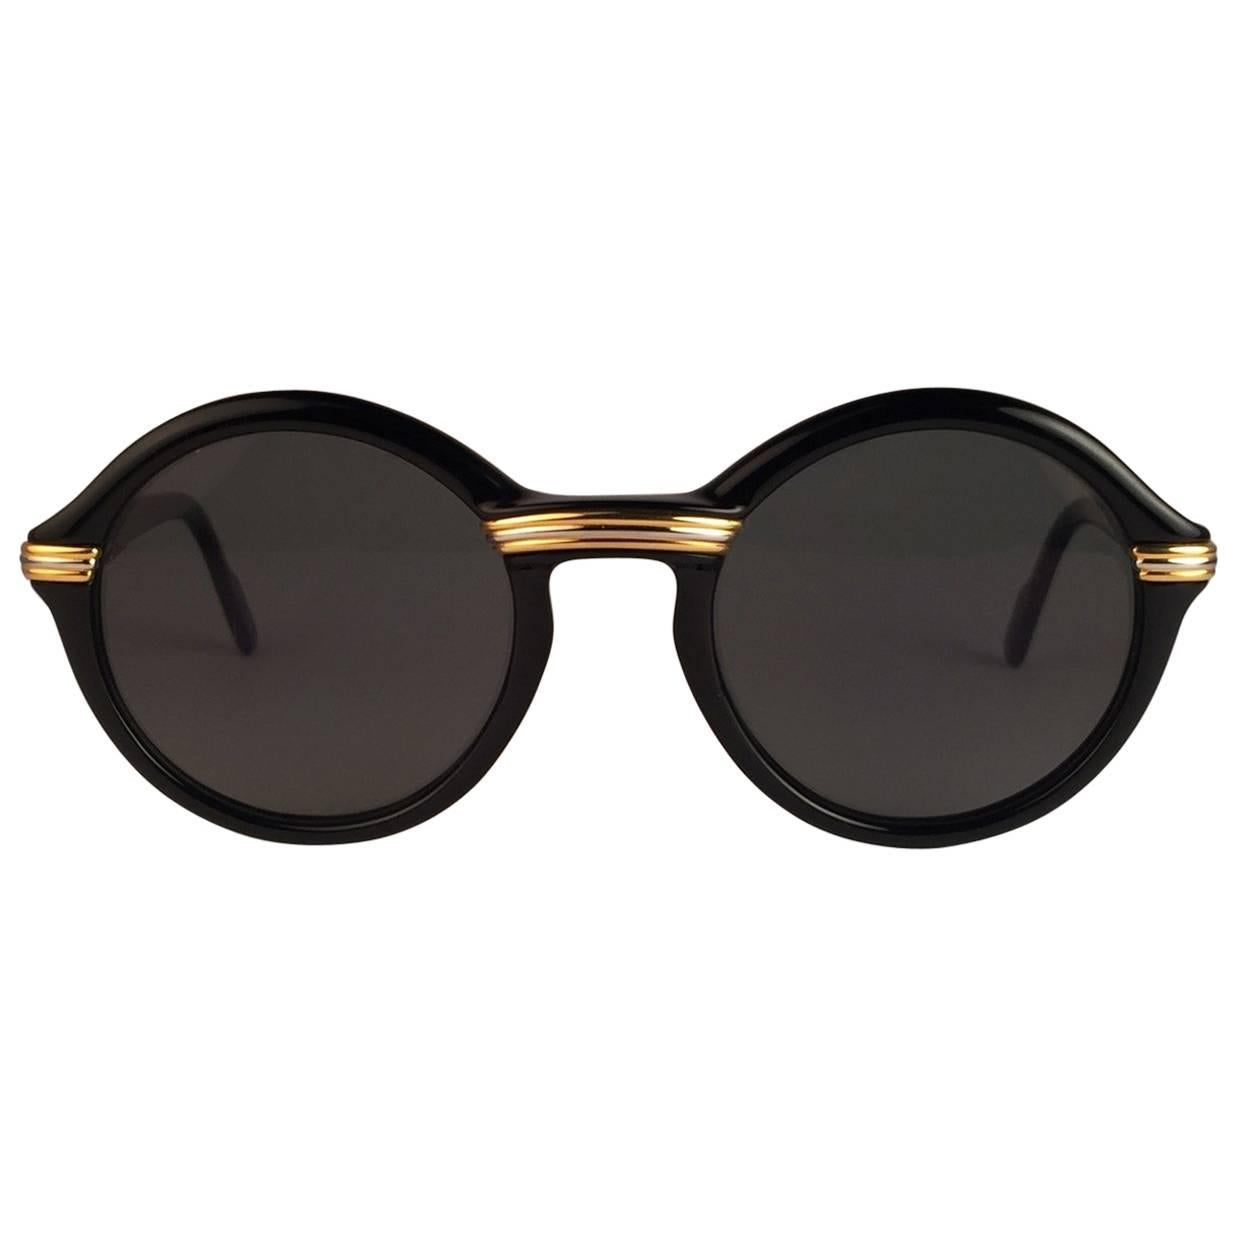 Vintage 1991 Original Cartier Cabriolet Art Deco Black & Gold Sunglasses with gold ( uv protection ) lenses
Frame has the famous real gold and white gold accents in the middle and on the sides. 
All hallmarks. Cartier gold signs on the earpaddles.